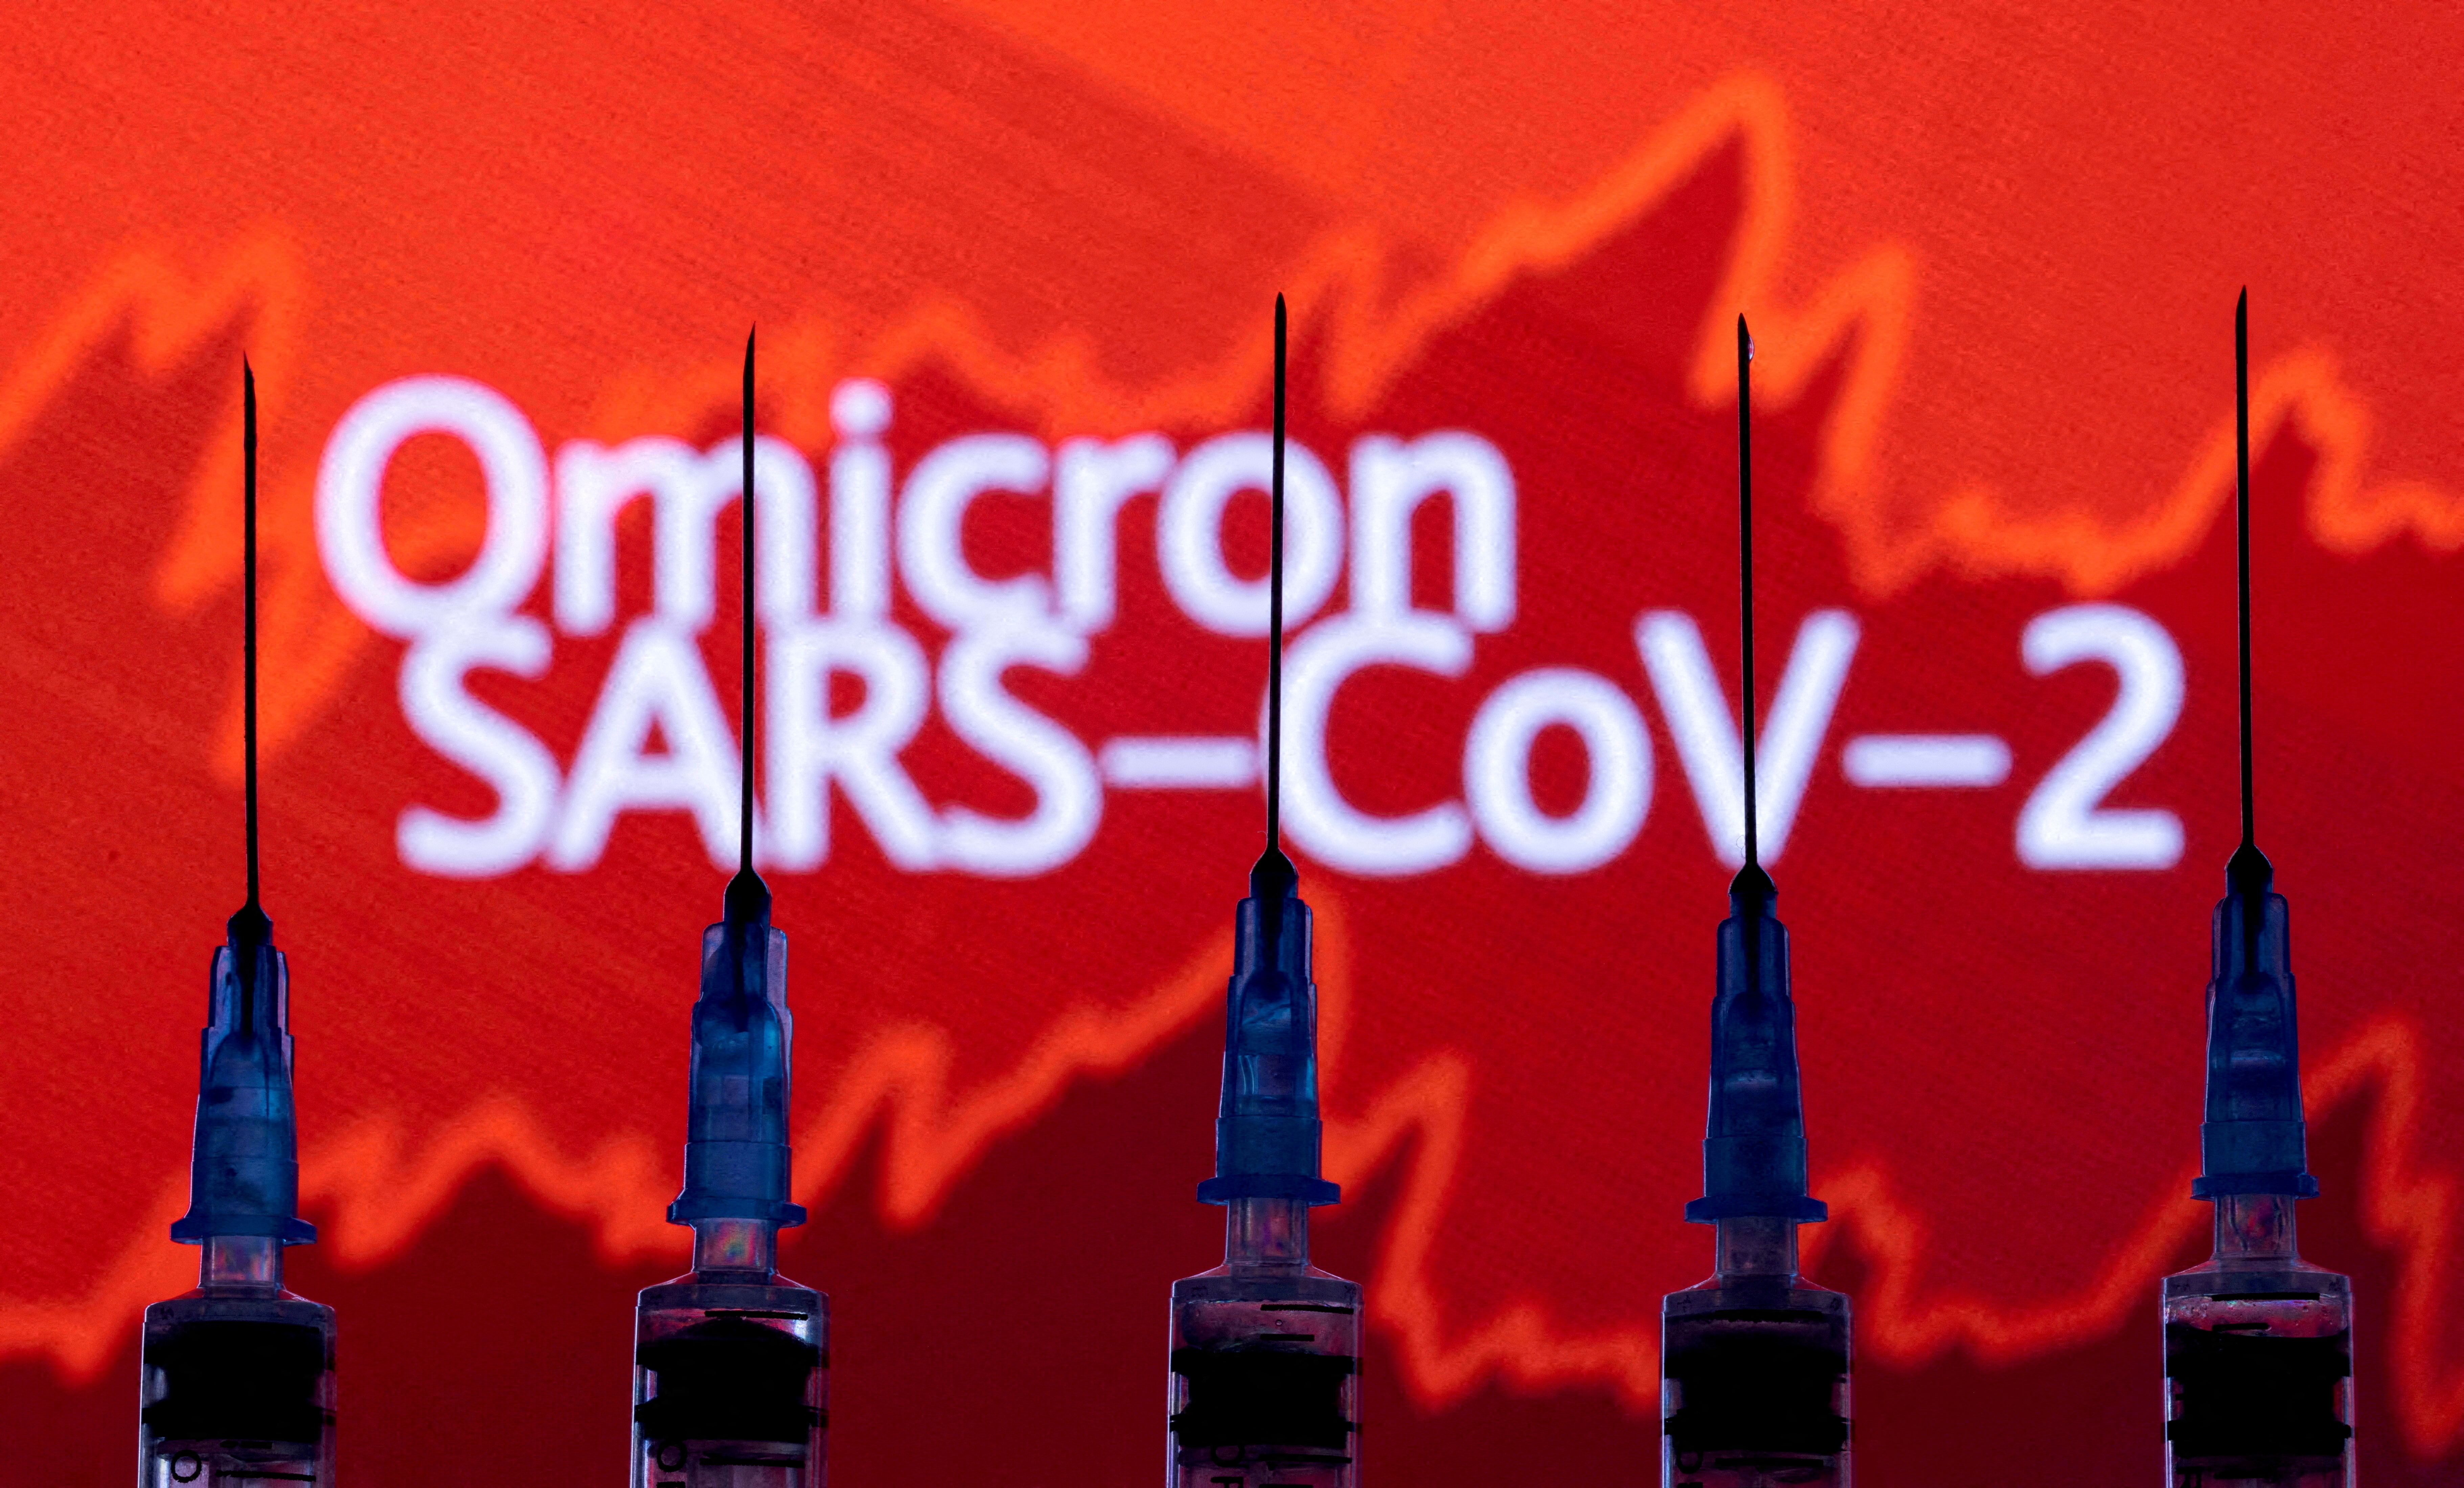 Syringes with needles are seen in front of a displayed stock graph and words "Omicron SARS-CoV-2" in this illustration taken